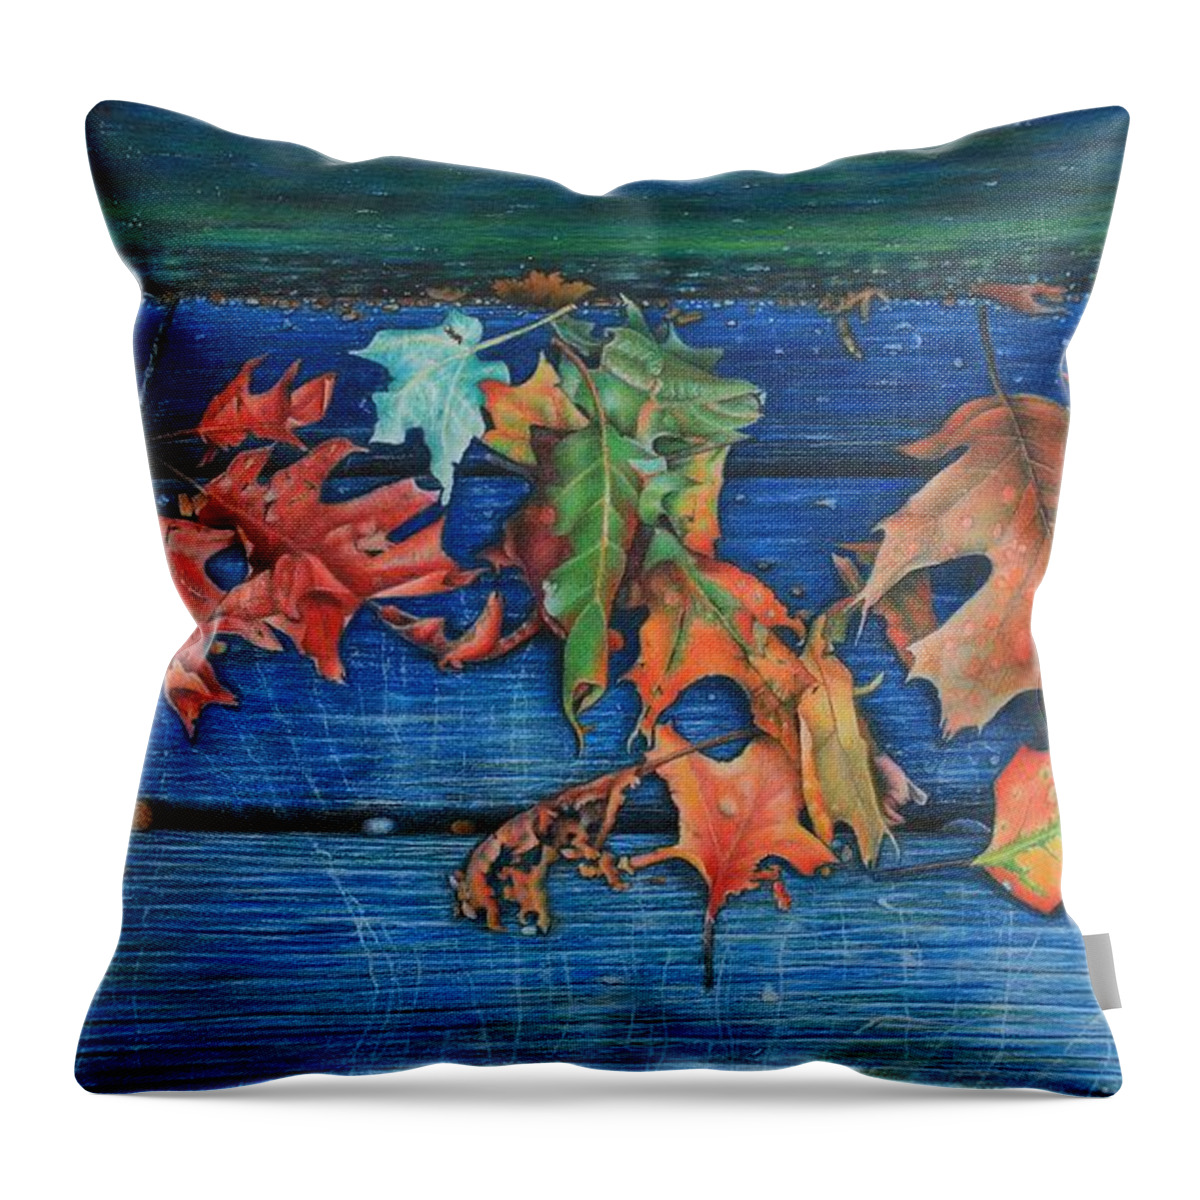 Four Seasons Throw Pillow featuring the drawing Primary Season by Pamela Clements